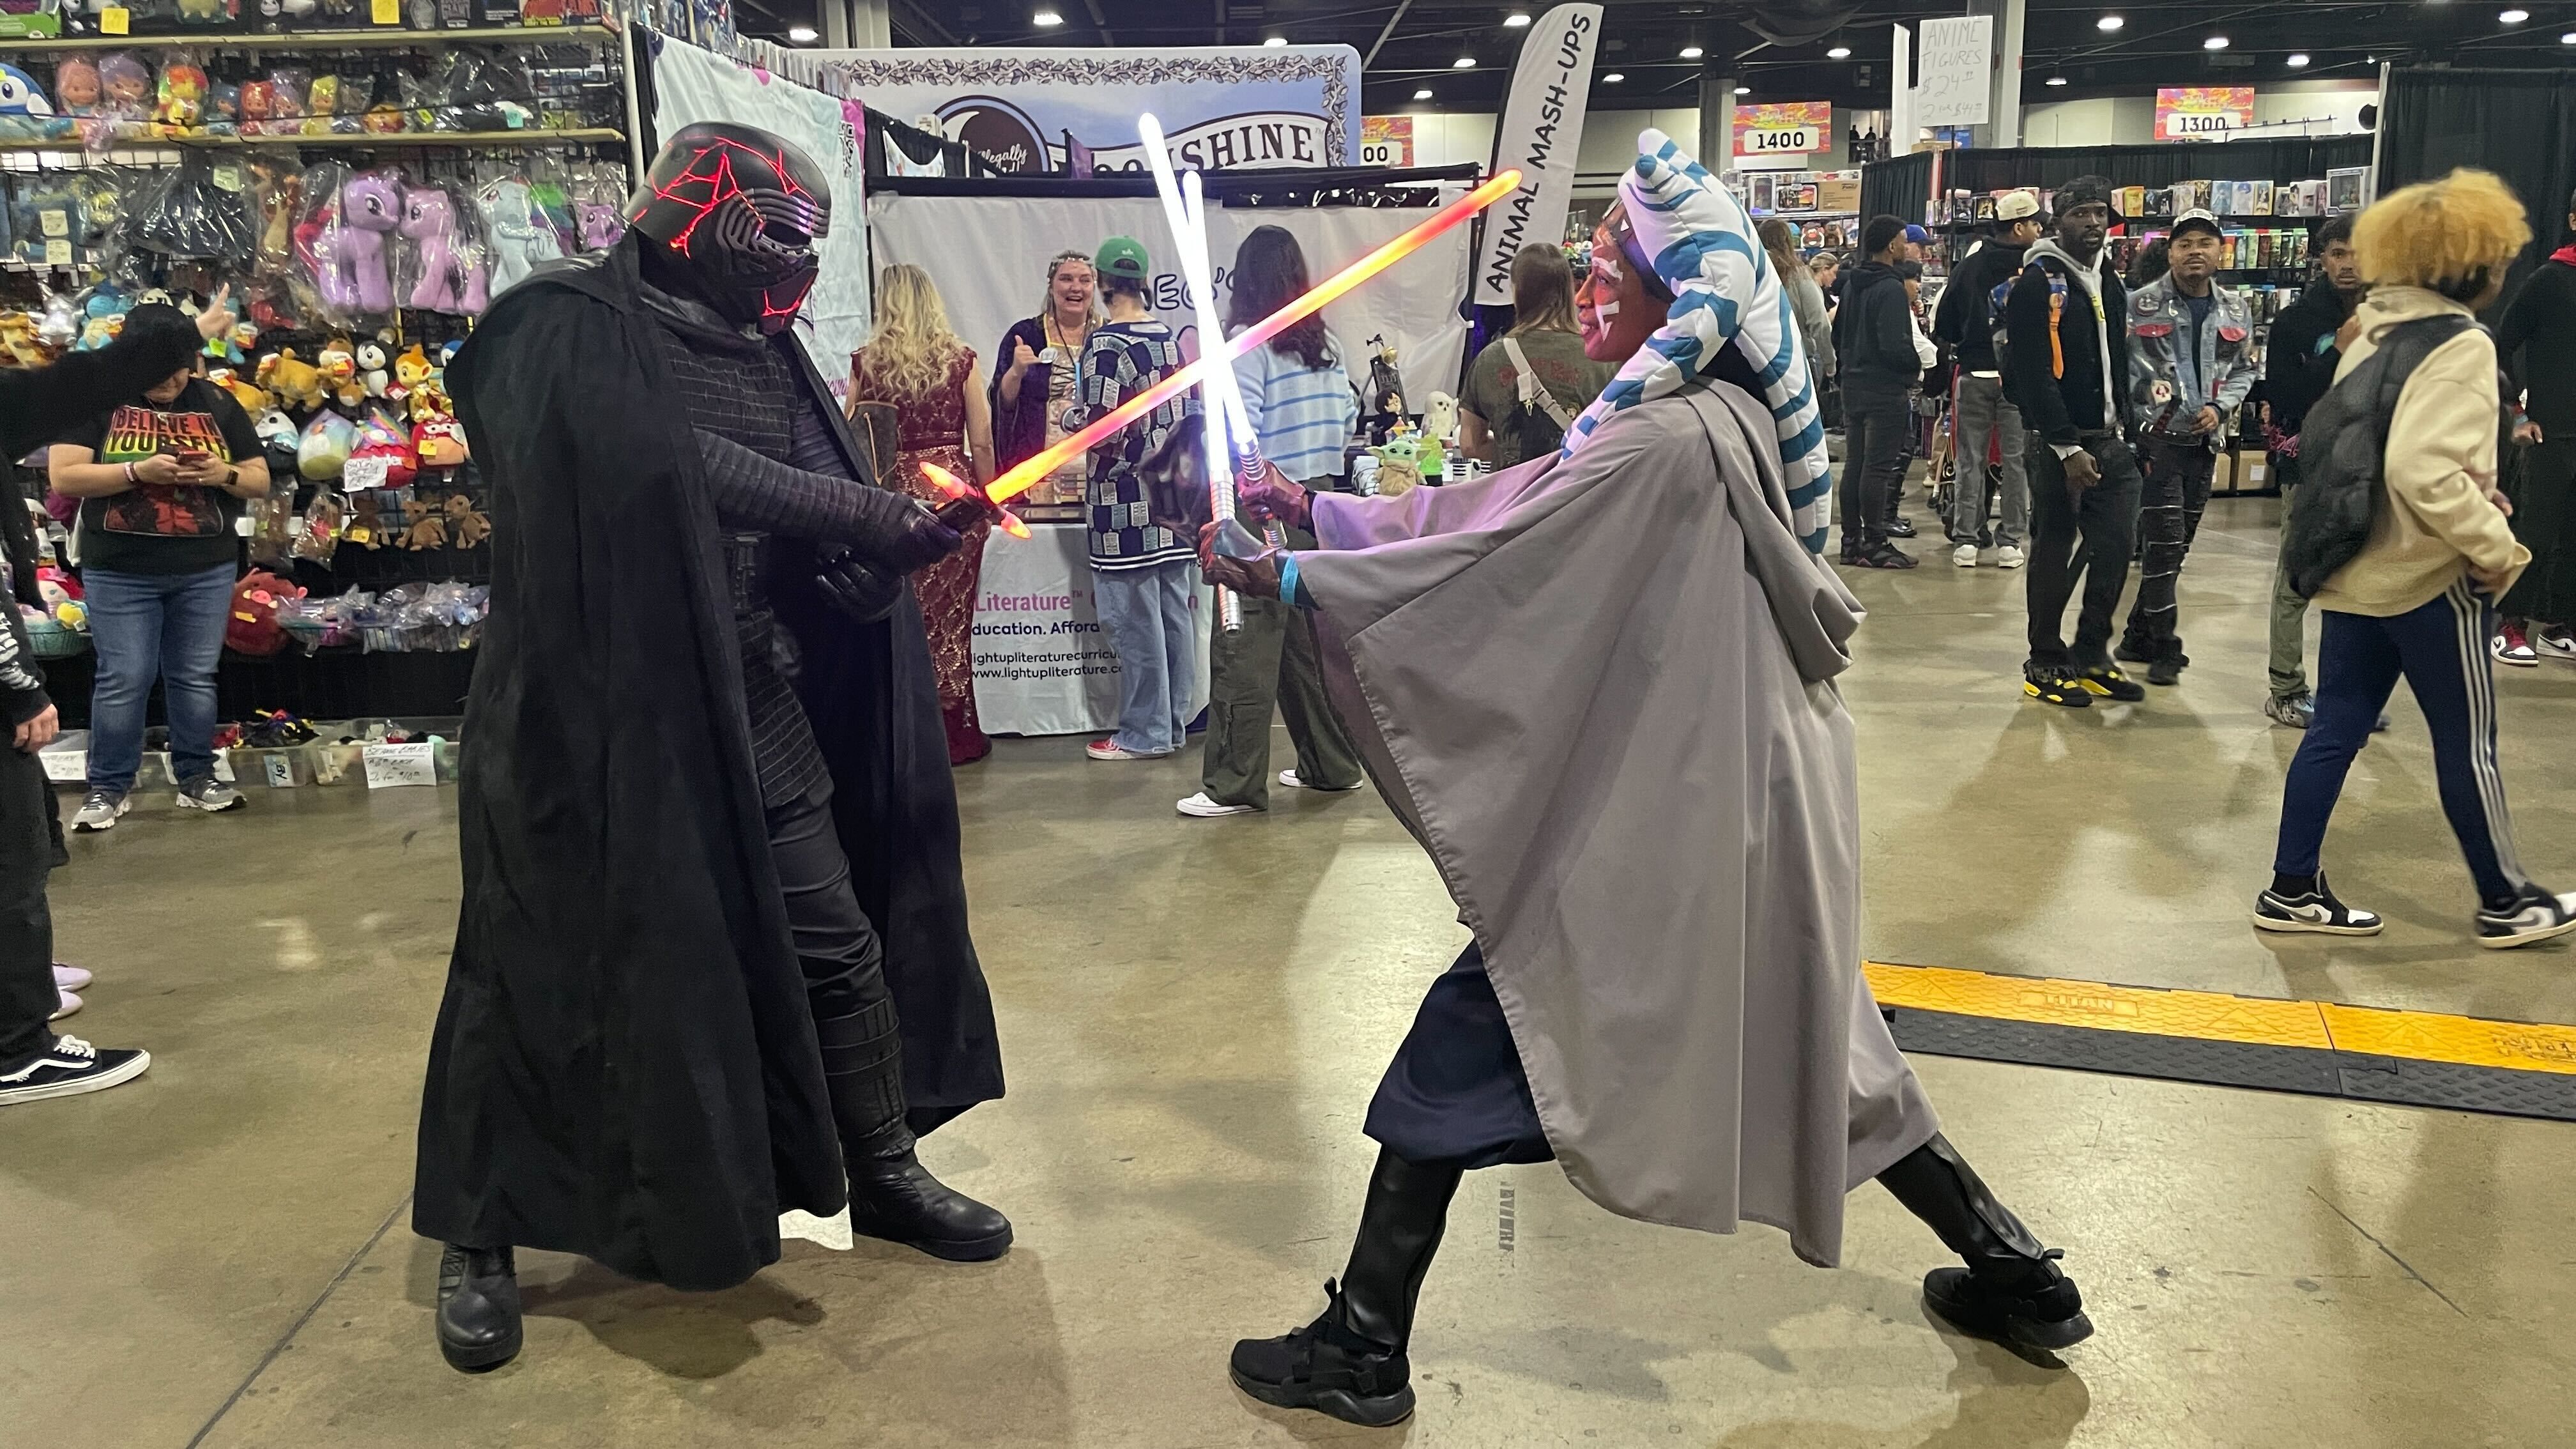 Cosplayers dressed as  the Star Ways characters Kylo Ren and Ahsoka Tano in a lightsaber battle.